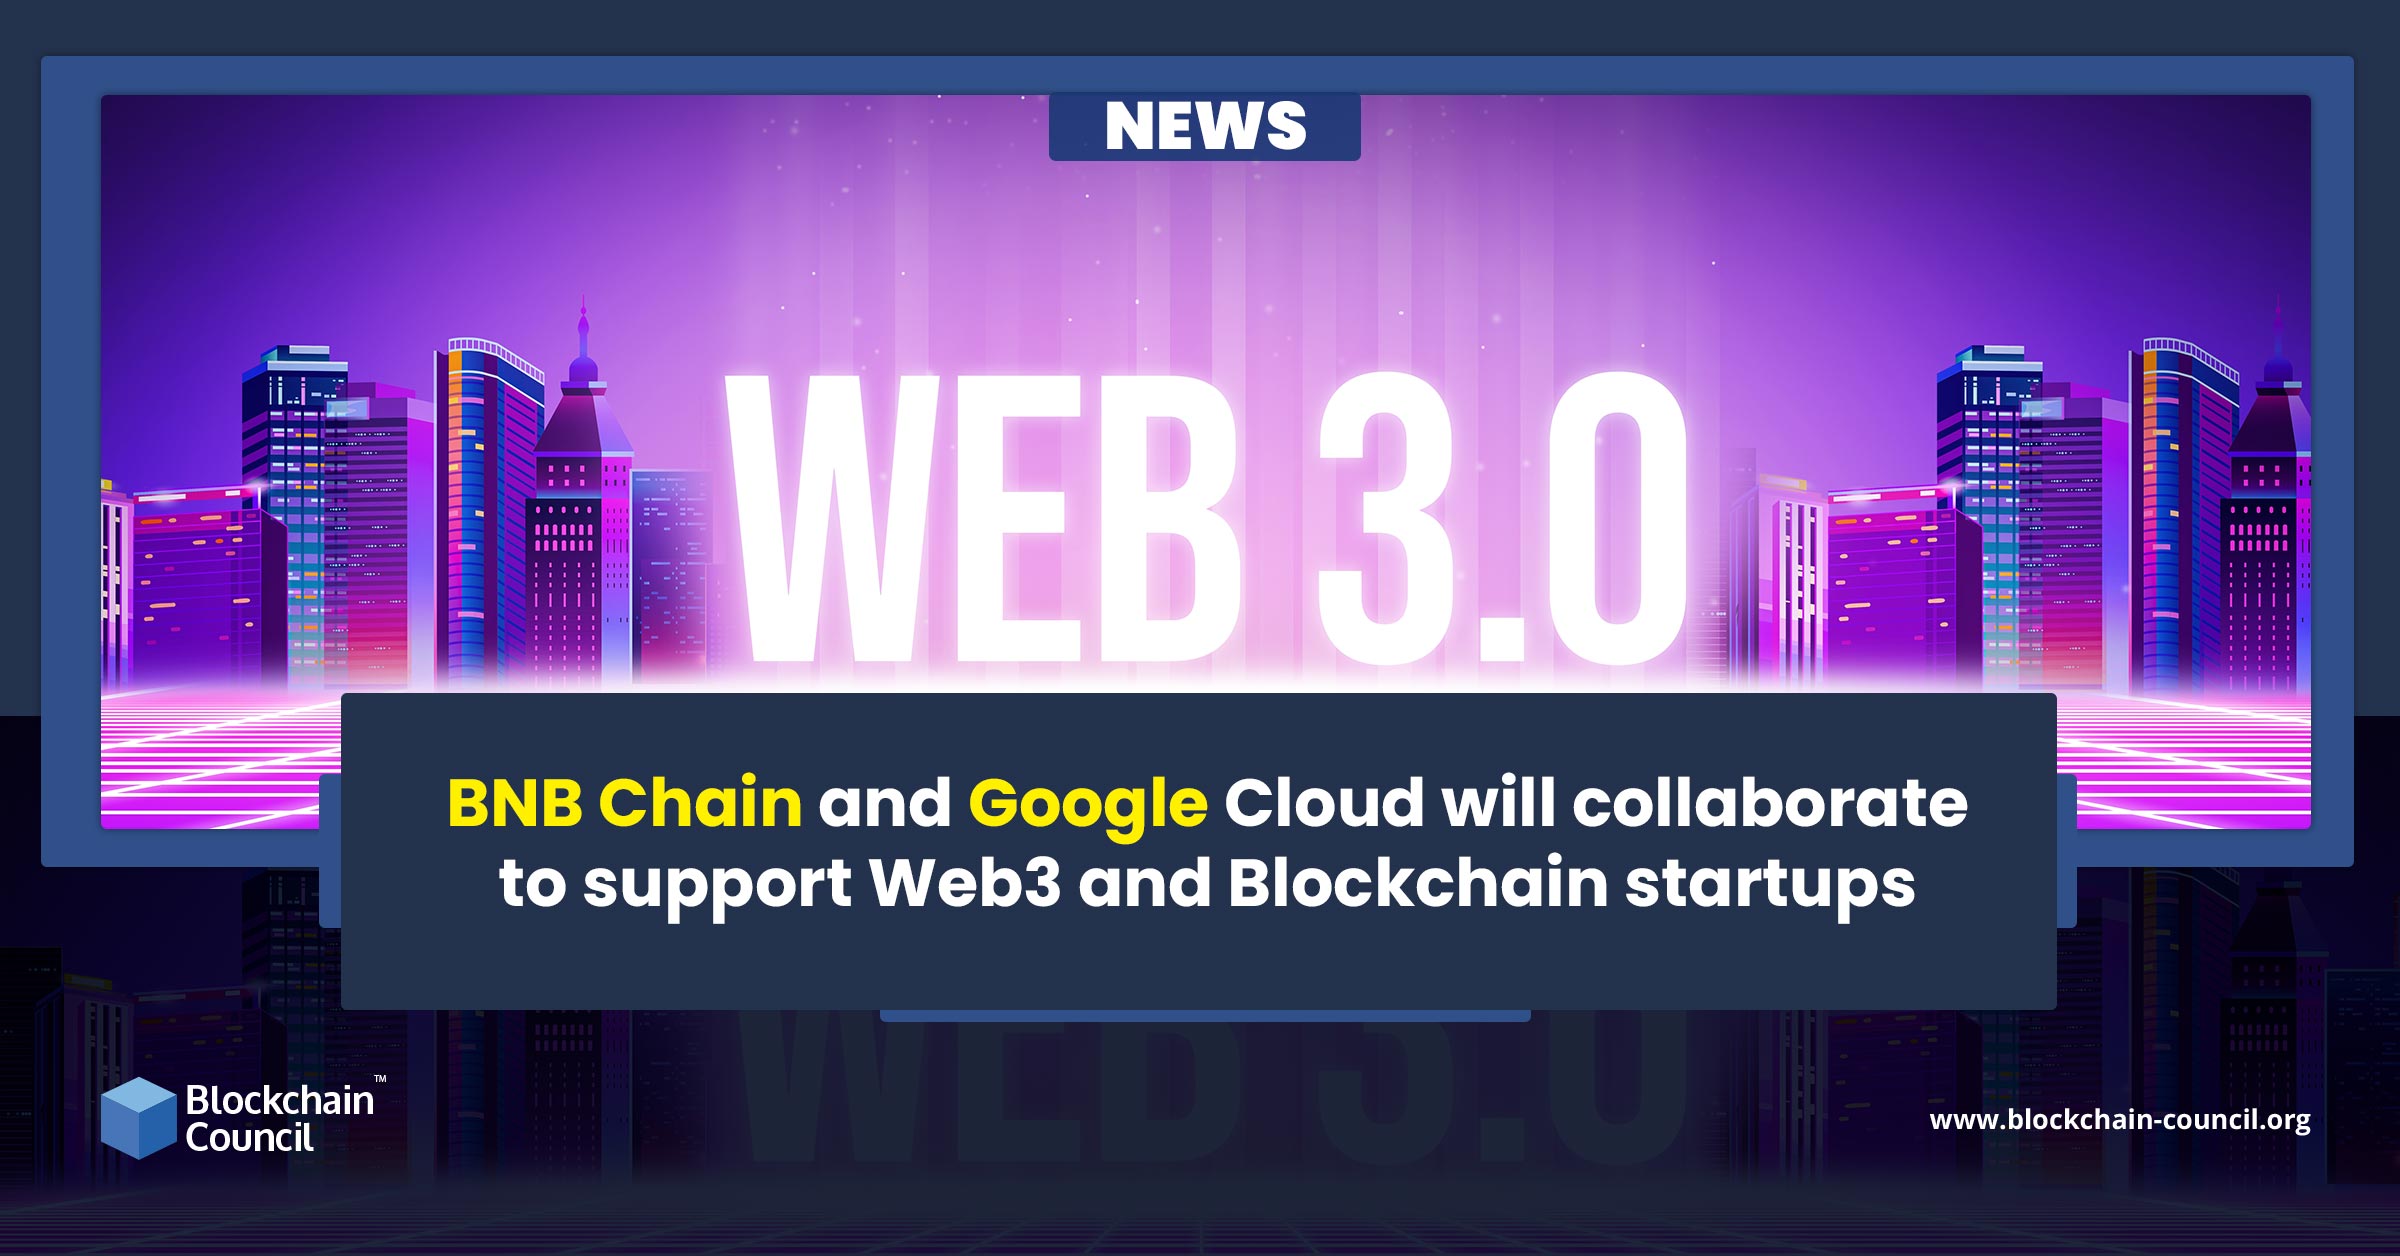 BNB Chain and Google Cloud will collaborate to support Web3 and Blockchain startups